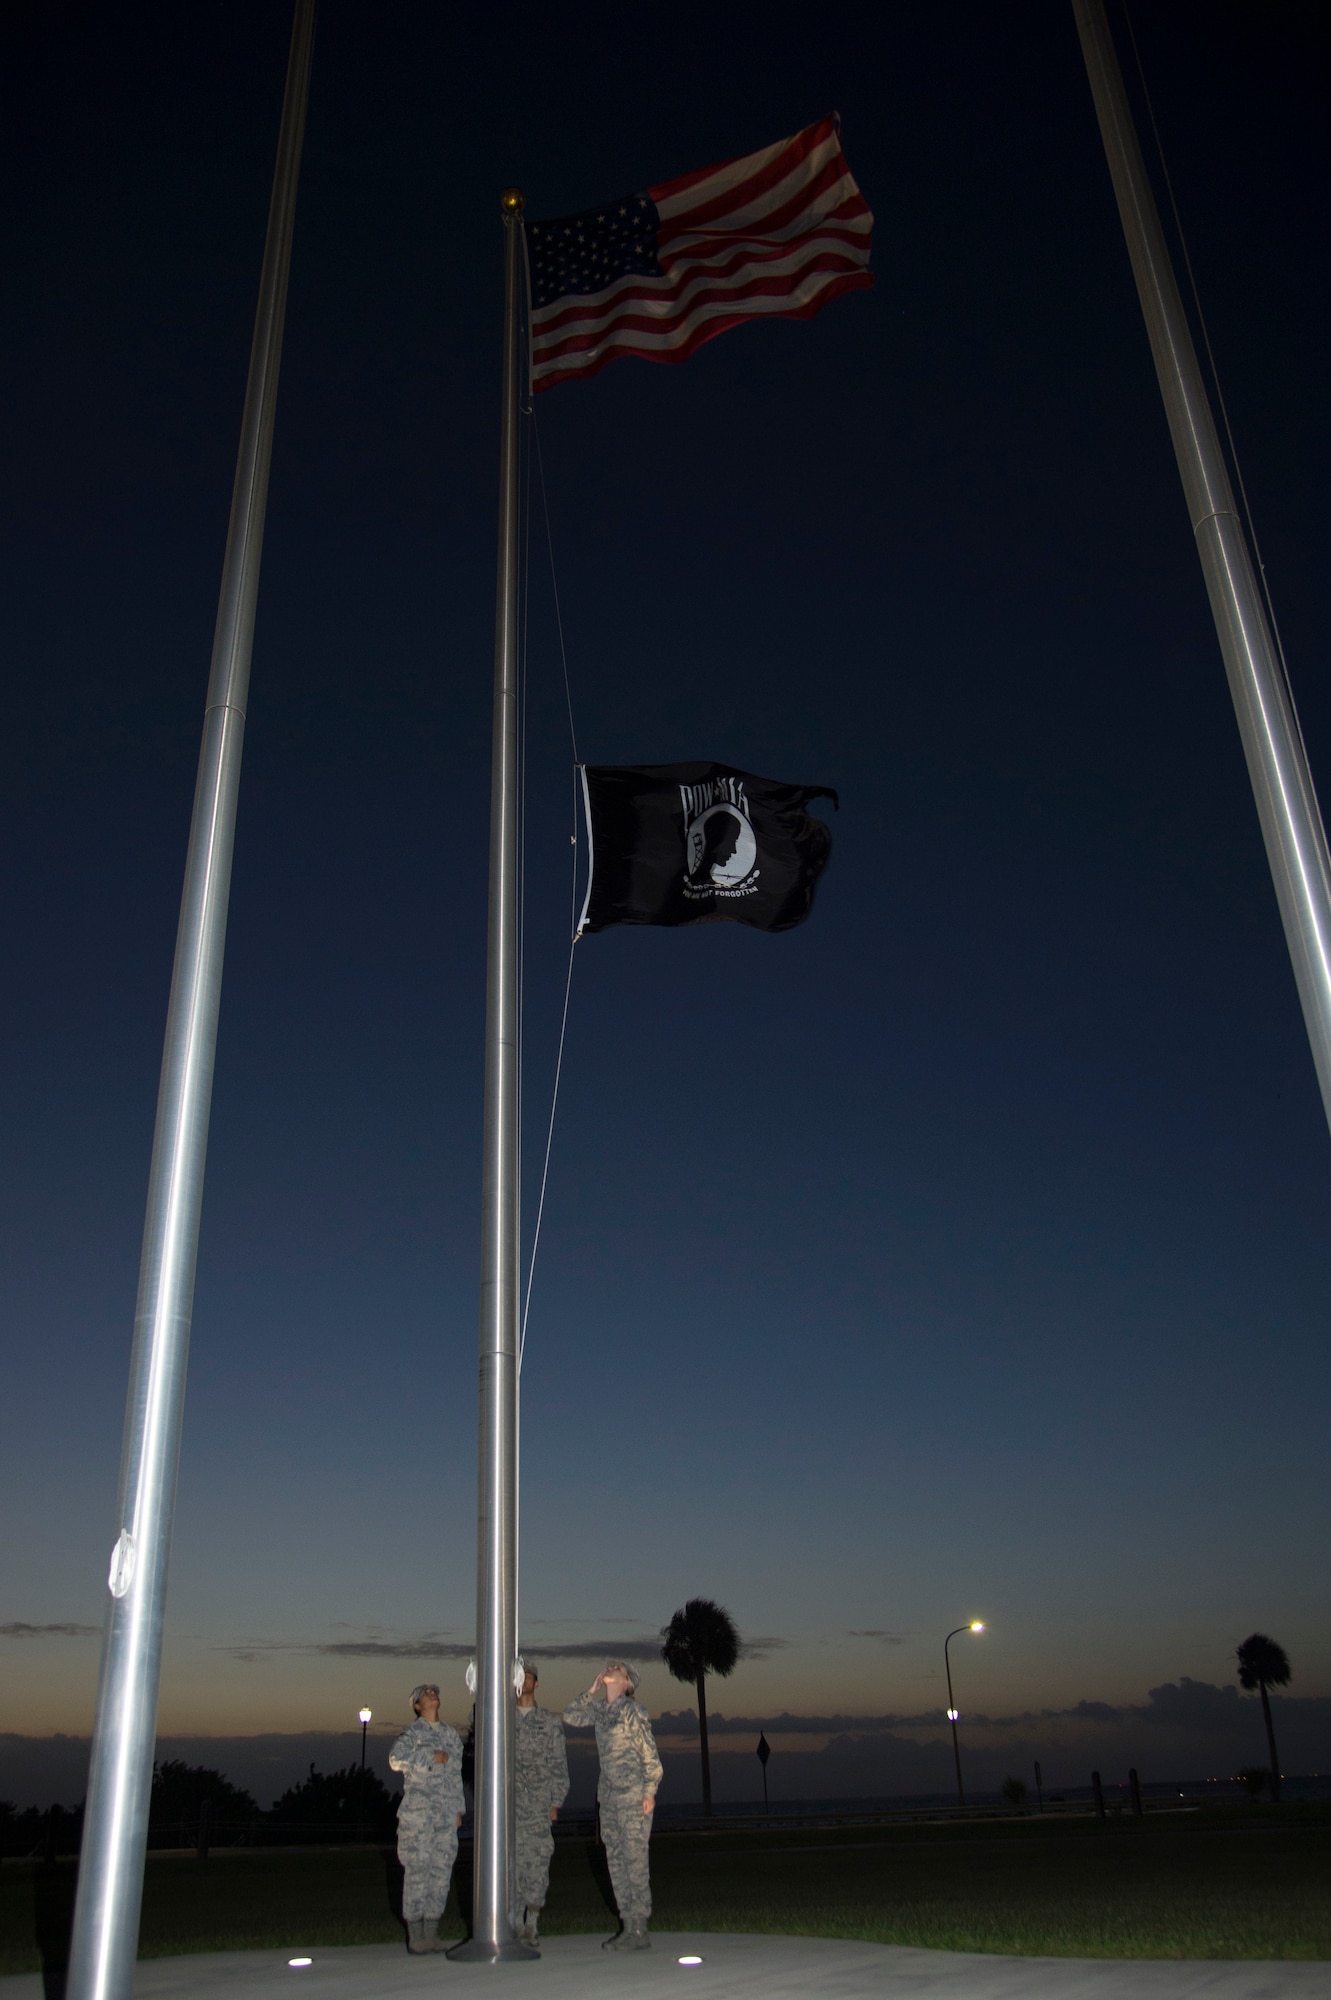 U.S. Air Force Senior Airman Karina Rodriguez (left), Airman 1st Class Dyllan Hipol (center), and Senior Airman Andrea Stutts (right), MacDill Air Force Base honor guardsmen, raise the POW/ MIA Flag Sept. 20, 2019, at MacDill AFB, Fla.  POW/MIA Recognition Day is commemorated nationally on the third Friday of every September in honor of service members who were prisoners of war as well as those missing in action. (U.S. Air Force photo by Airman 1st Class Shannon Bowman)